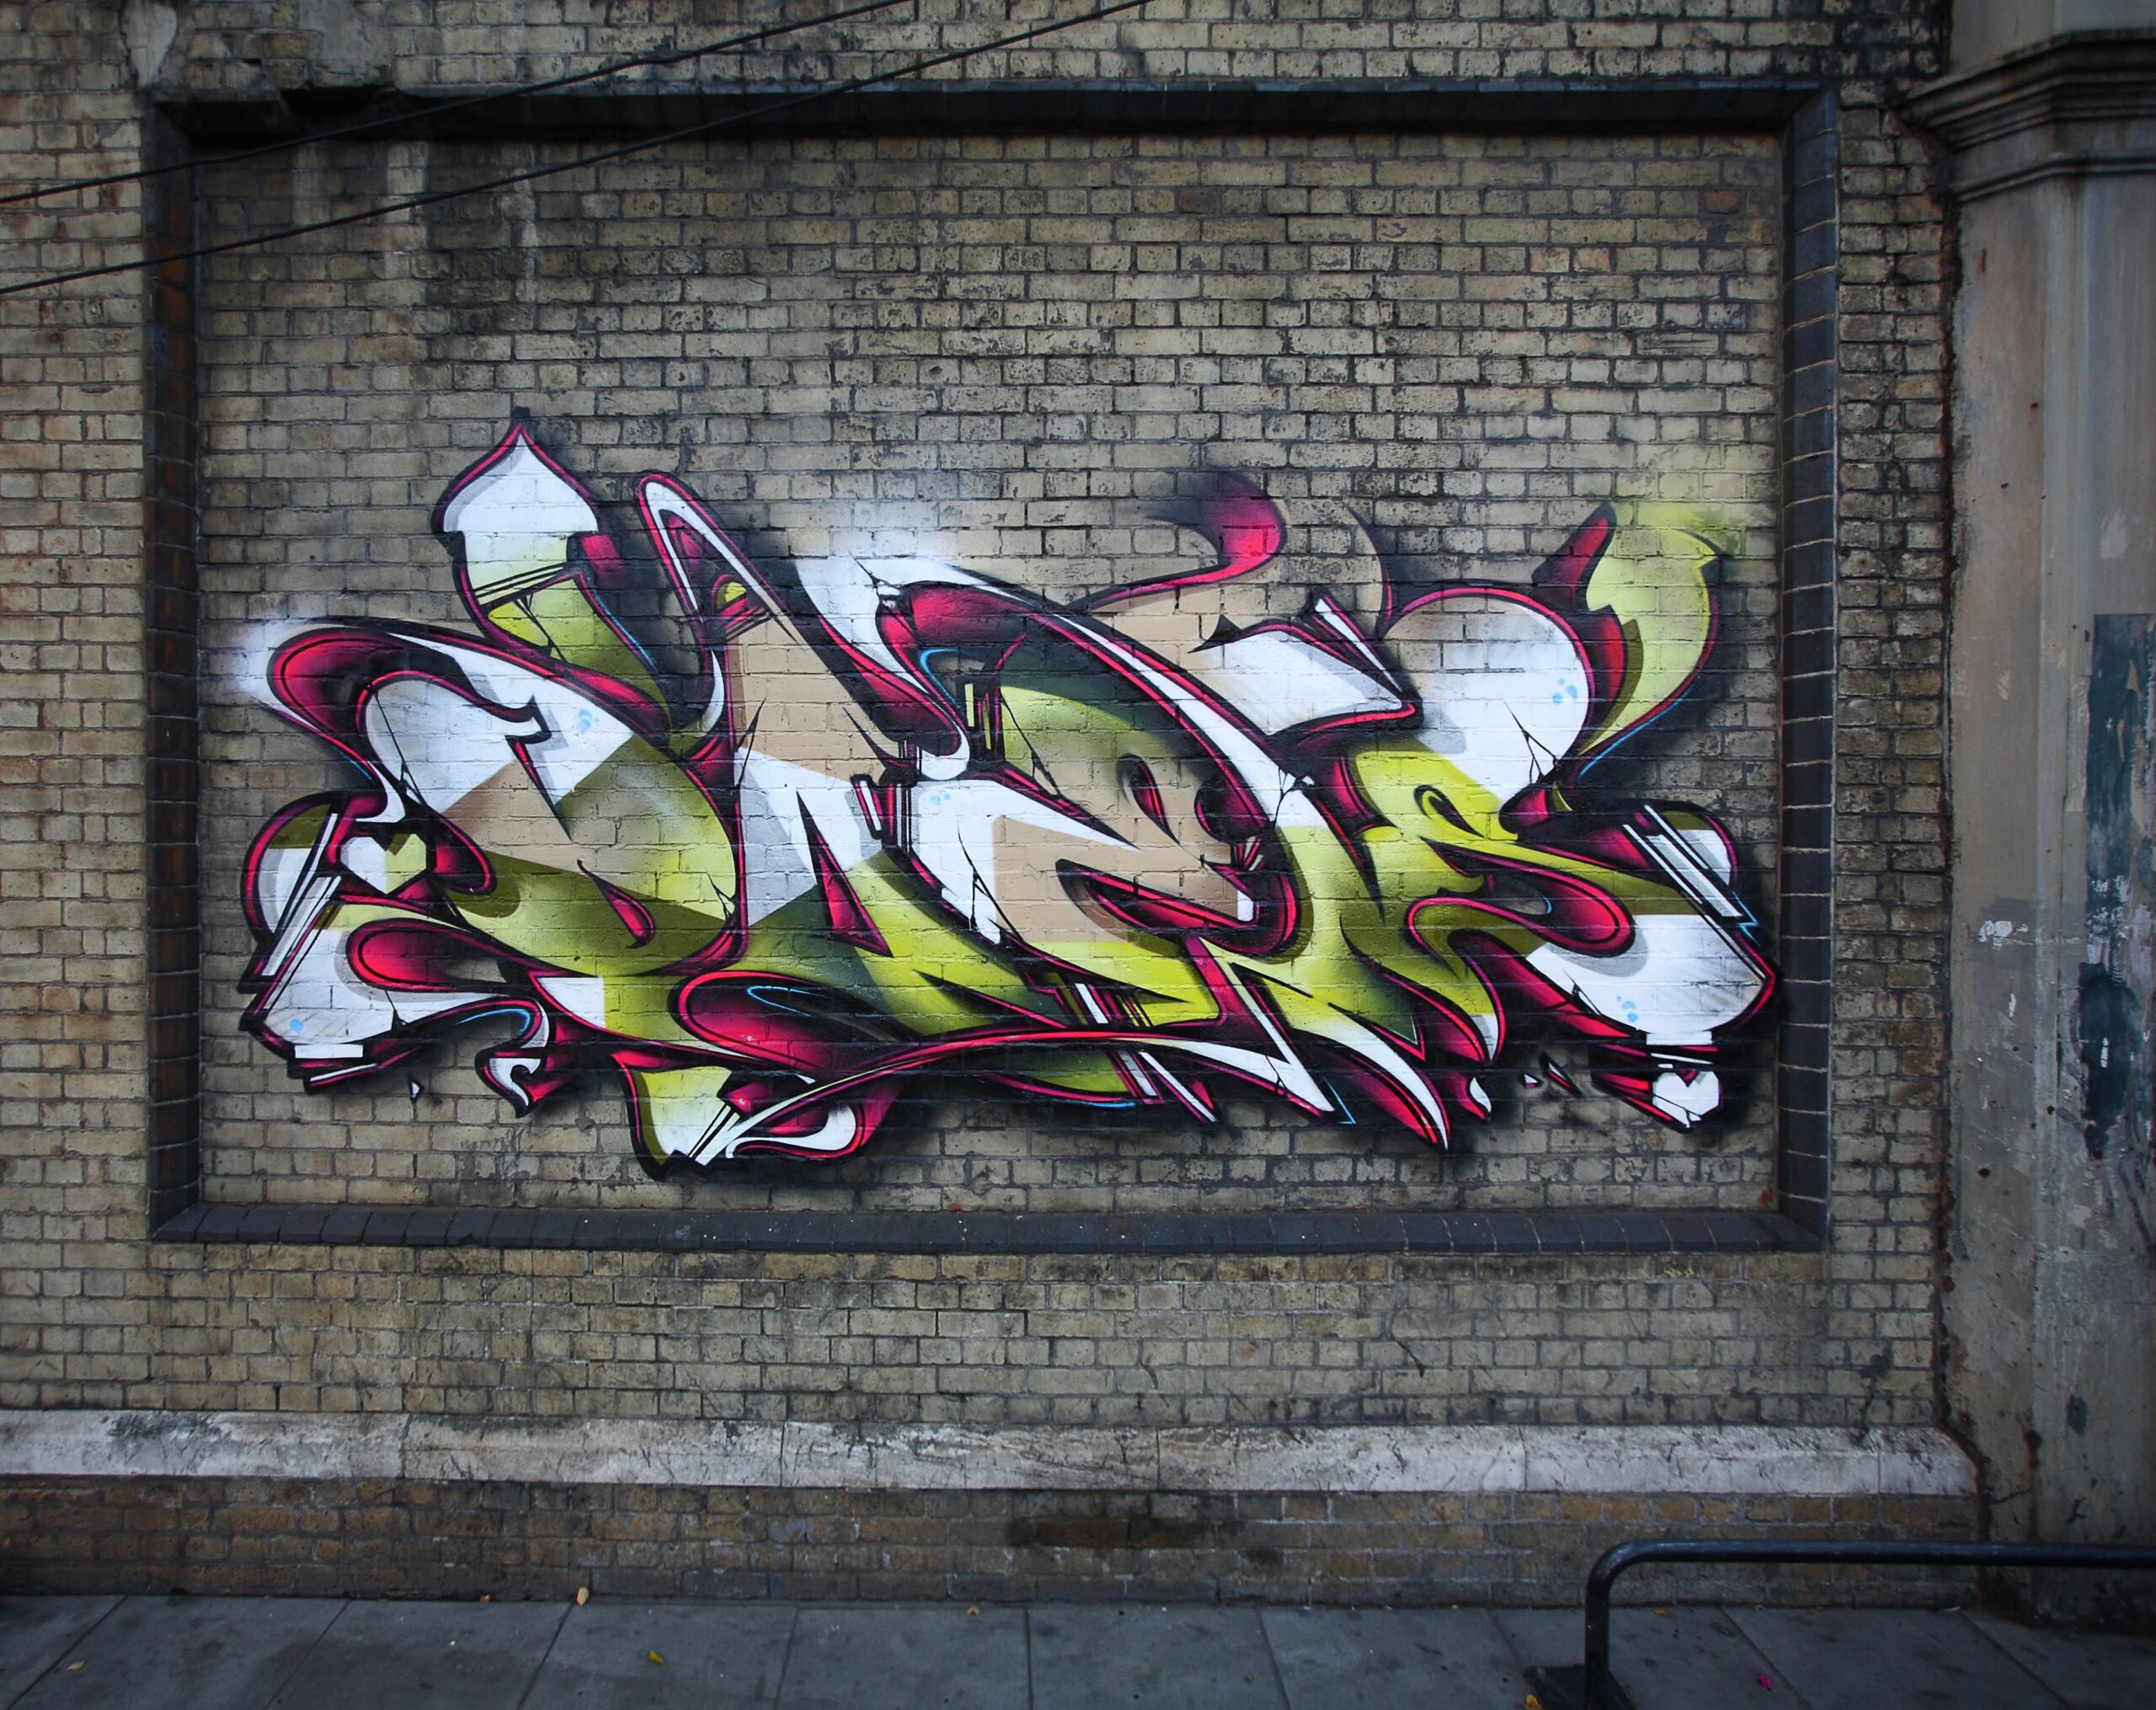 A work by Does - Does_London,UK